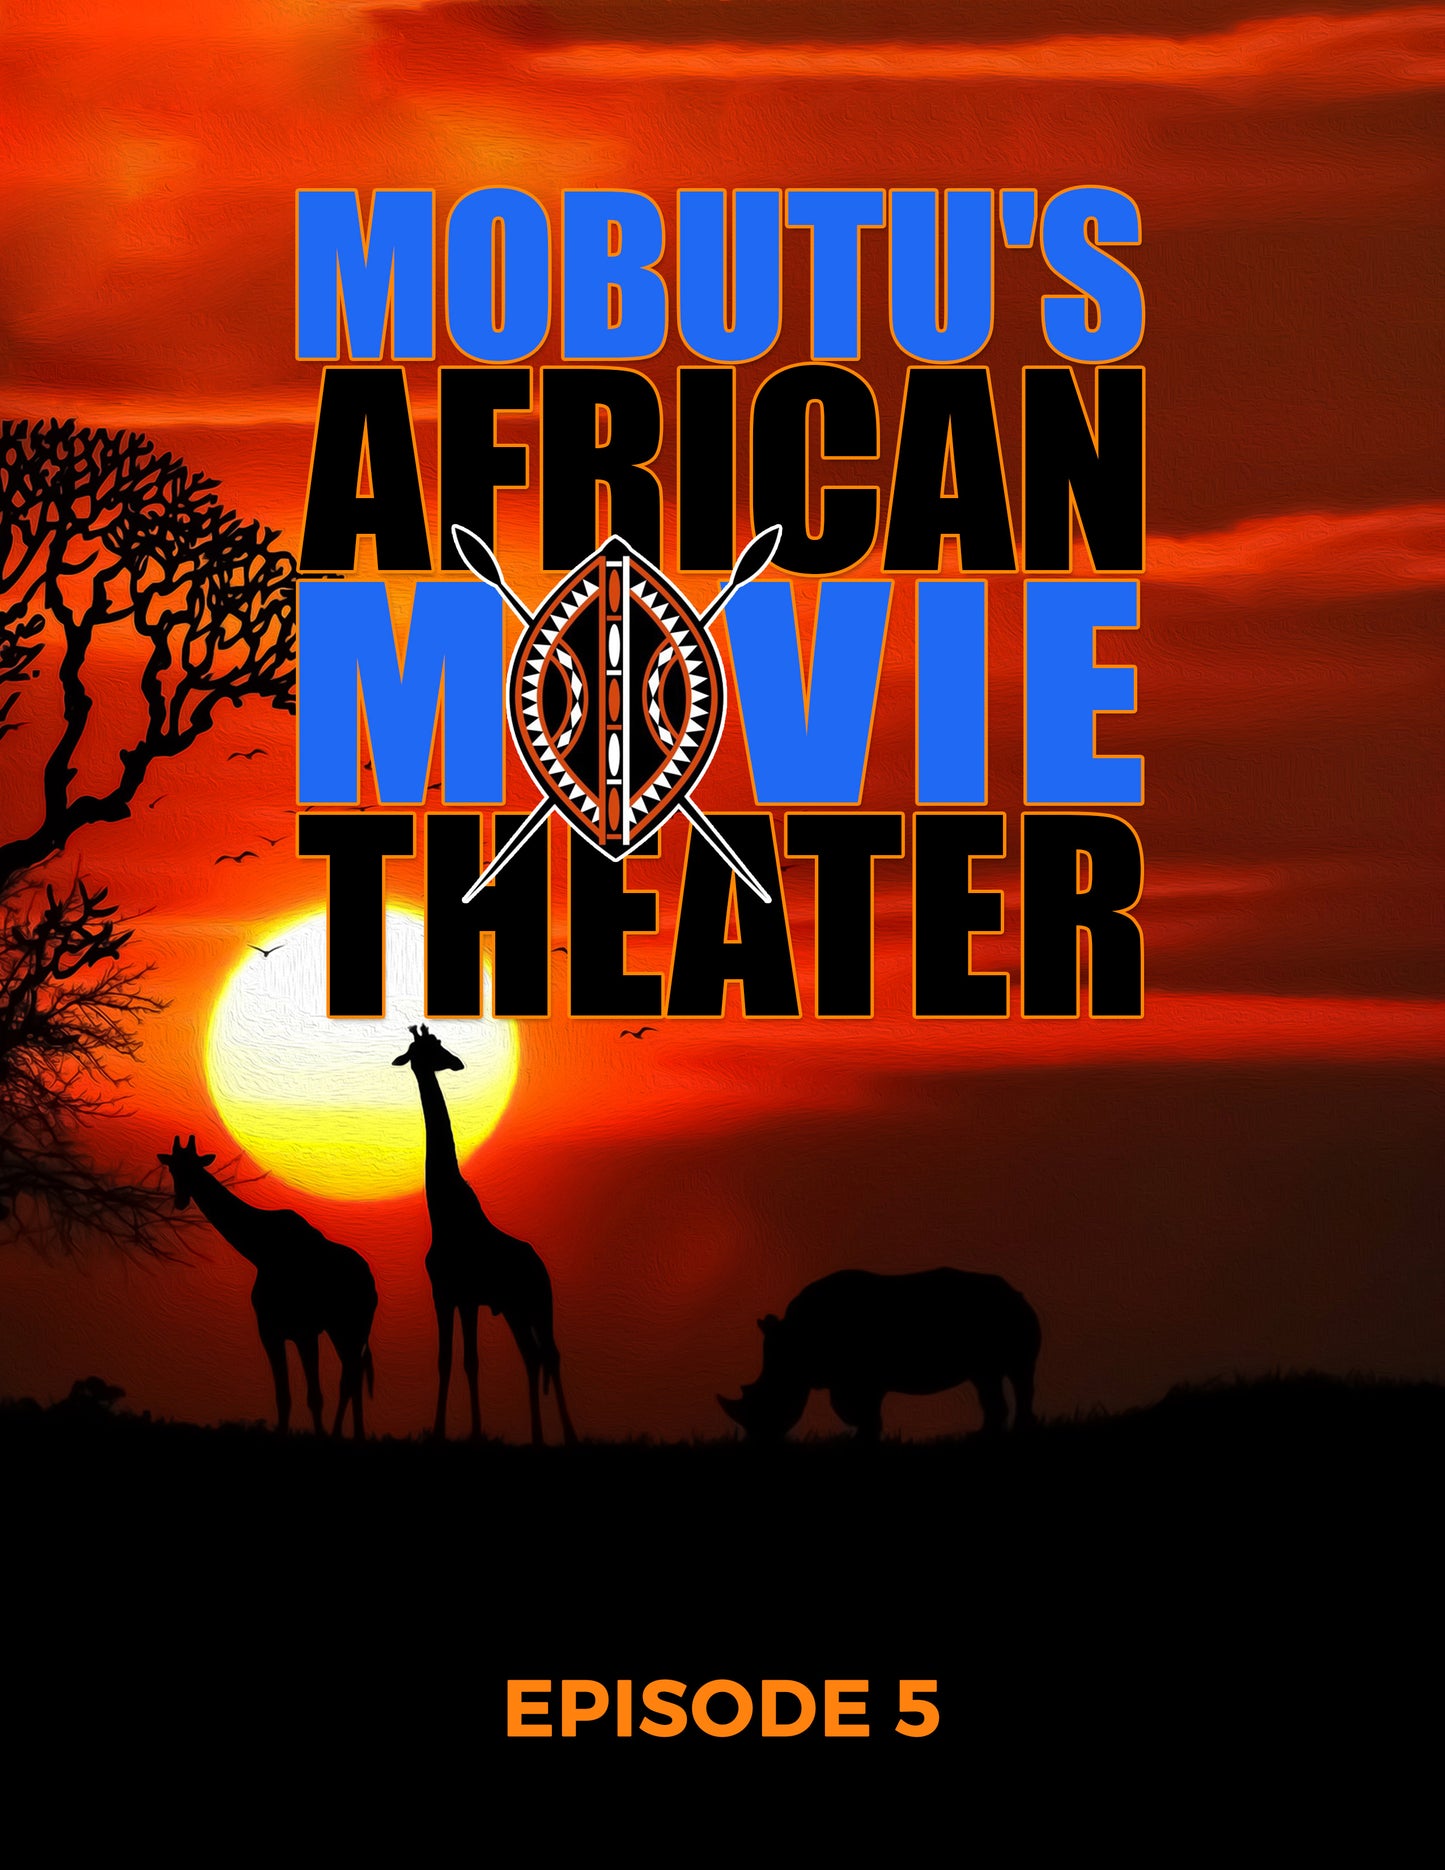 Mobutu's African Movie Theater: Episode 5 cover art